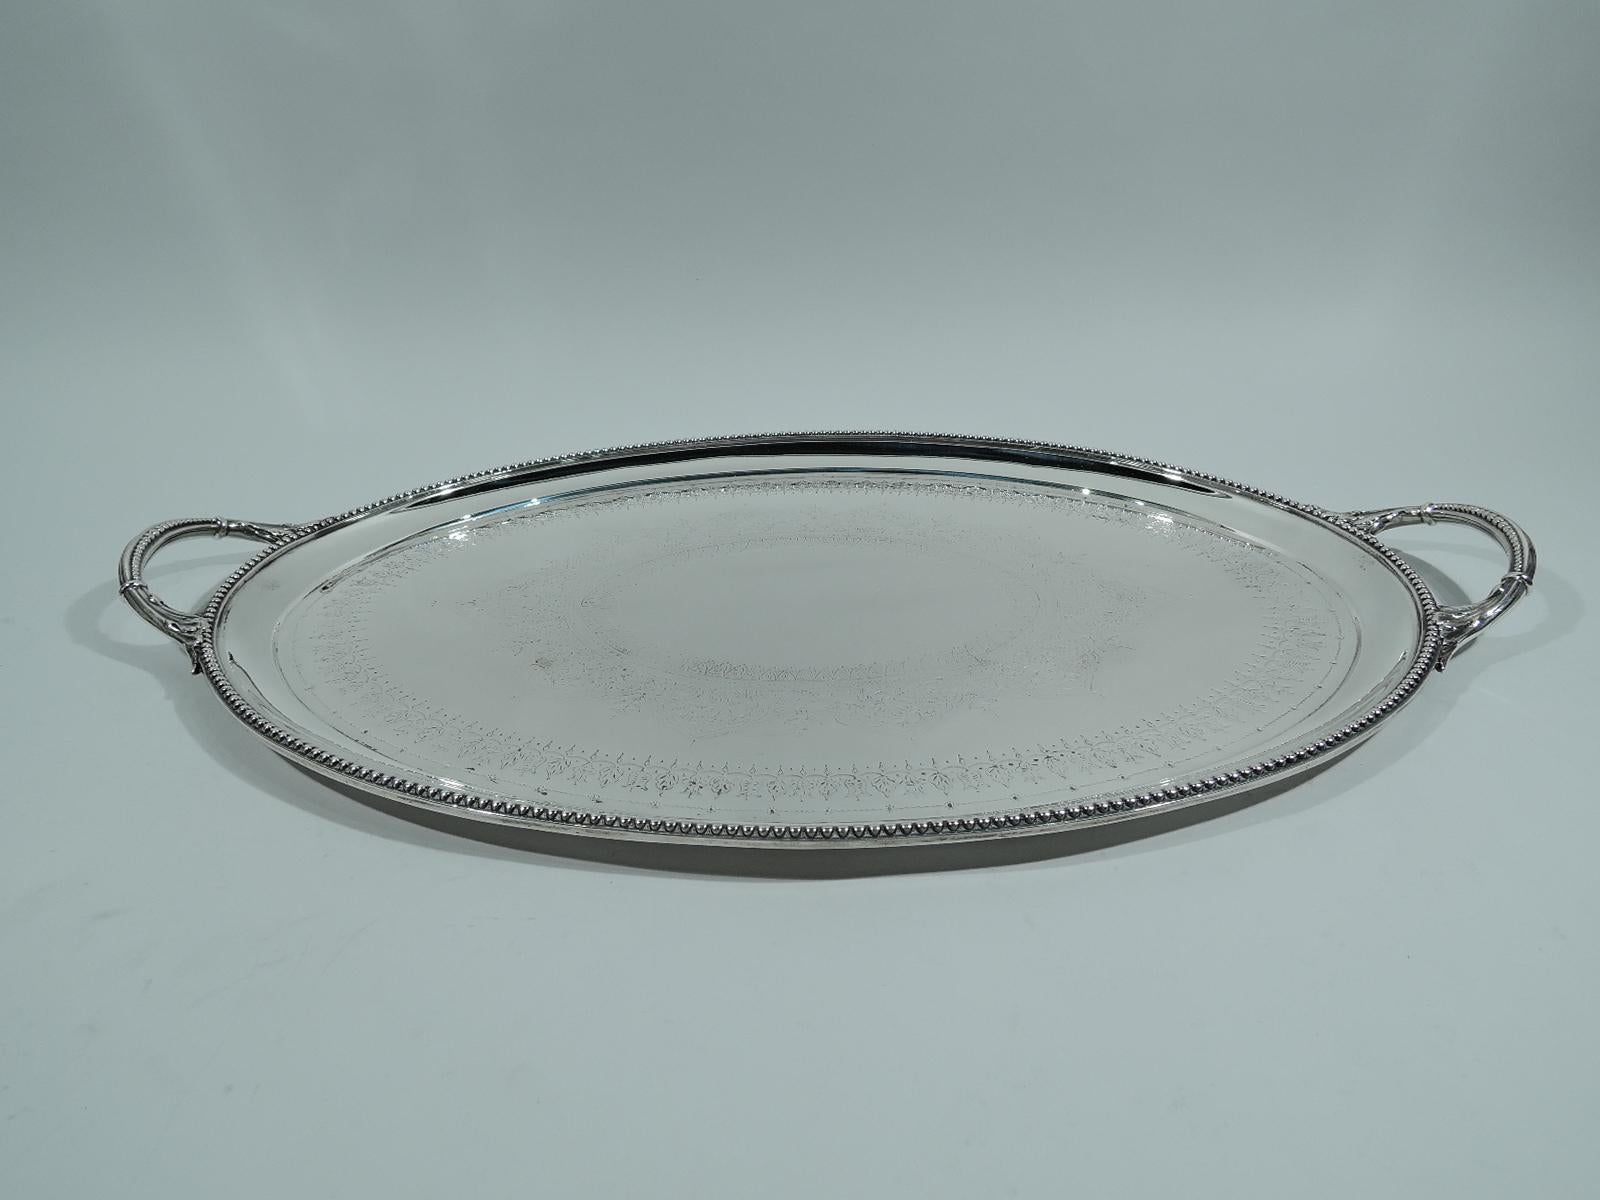 Victorian Regency sterling silver tea tray. Made by Walter & John Barnard in 1881. Oval with beaded rim and leaf-mounted and beaded c-scroll end handles. Well has central oval cartouche (vacant) with leaf-and-dart border and multi-foil surround. Two